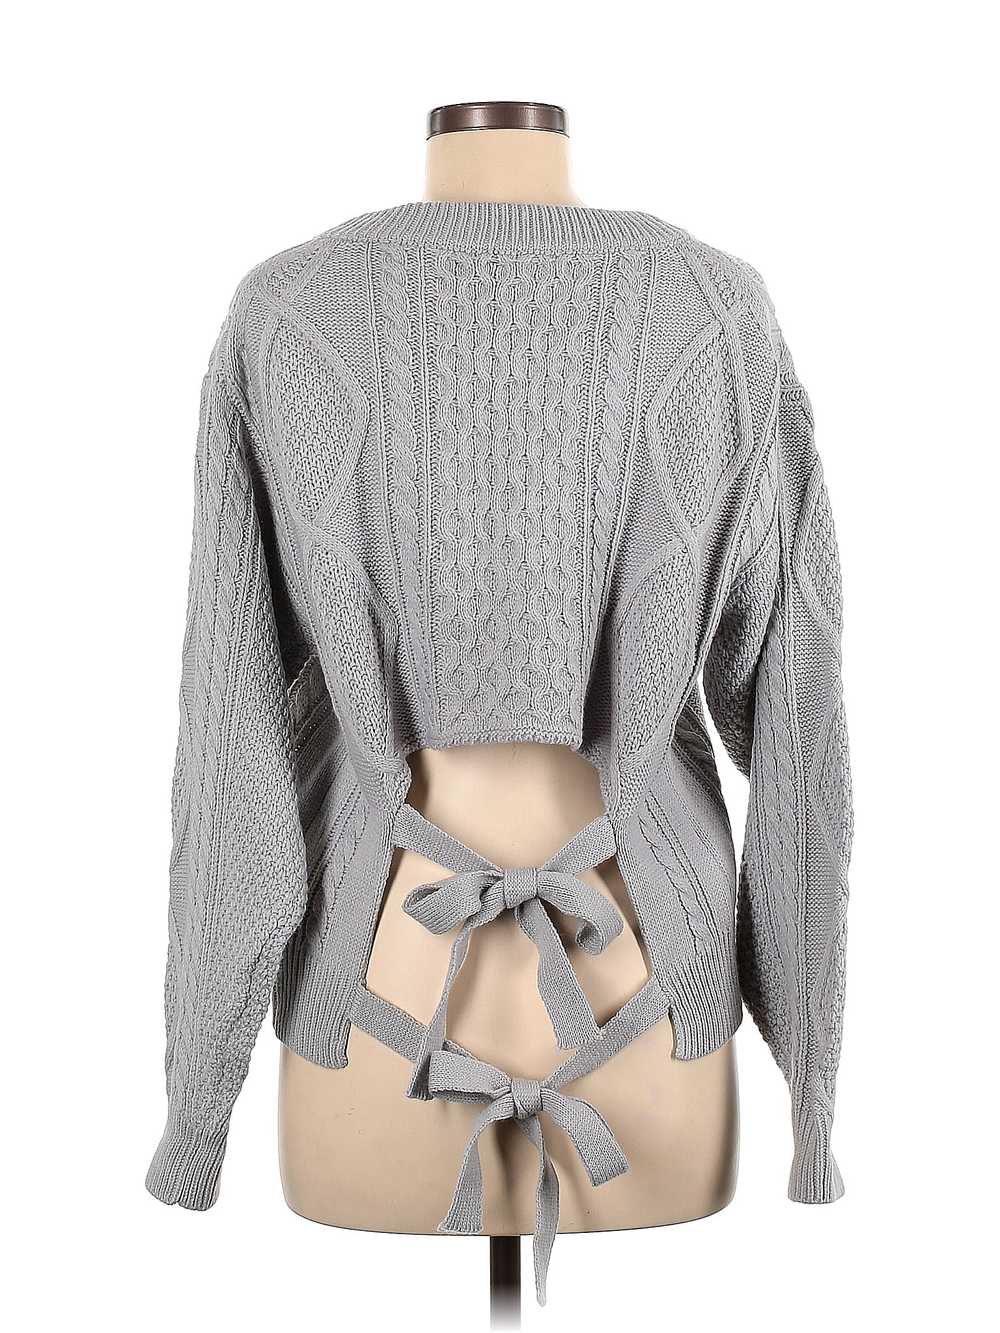 VICI Women Gray Pullover Sweater M - image 2